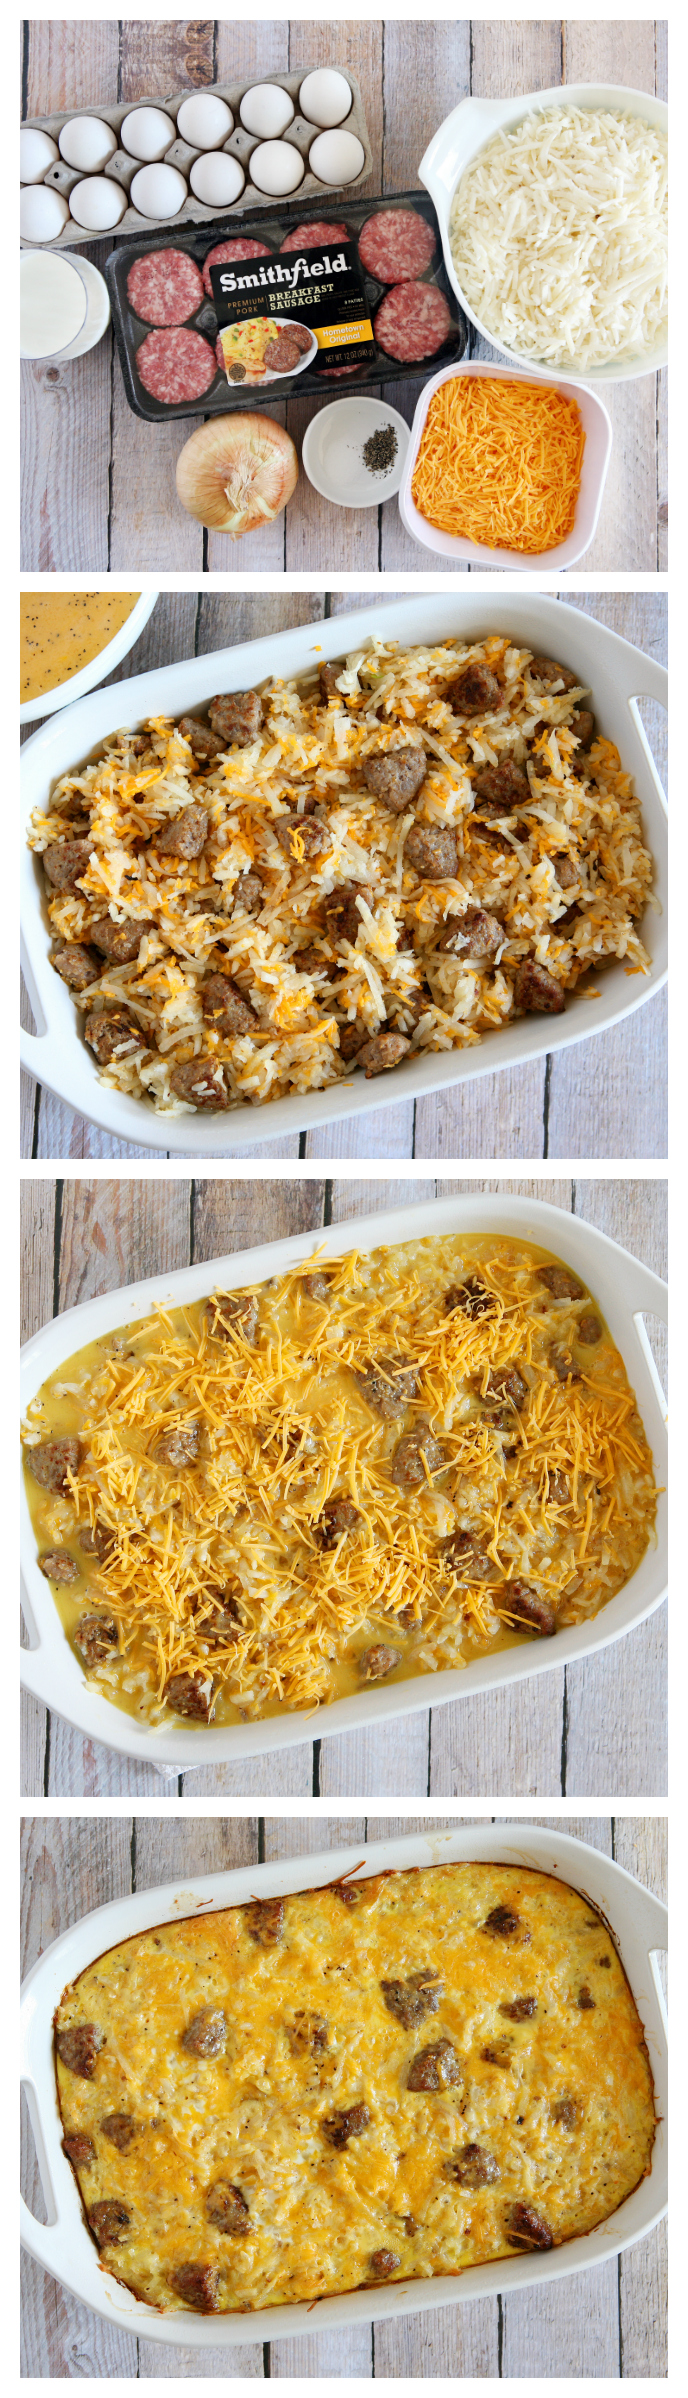 Sausage Hashbrown Breakfast Casserole | Delicious Breakfast filled with eggs, cheese, hashbrowns and sausage! 